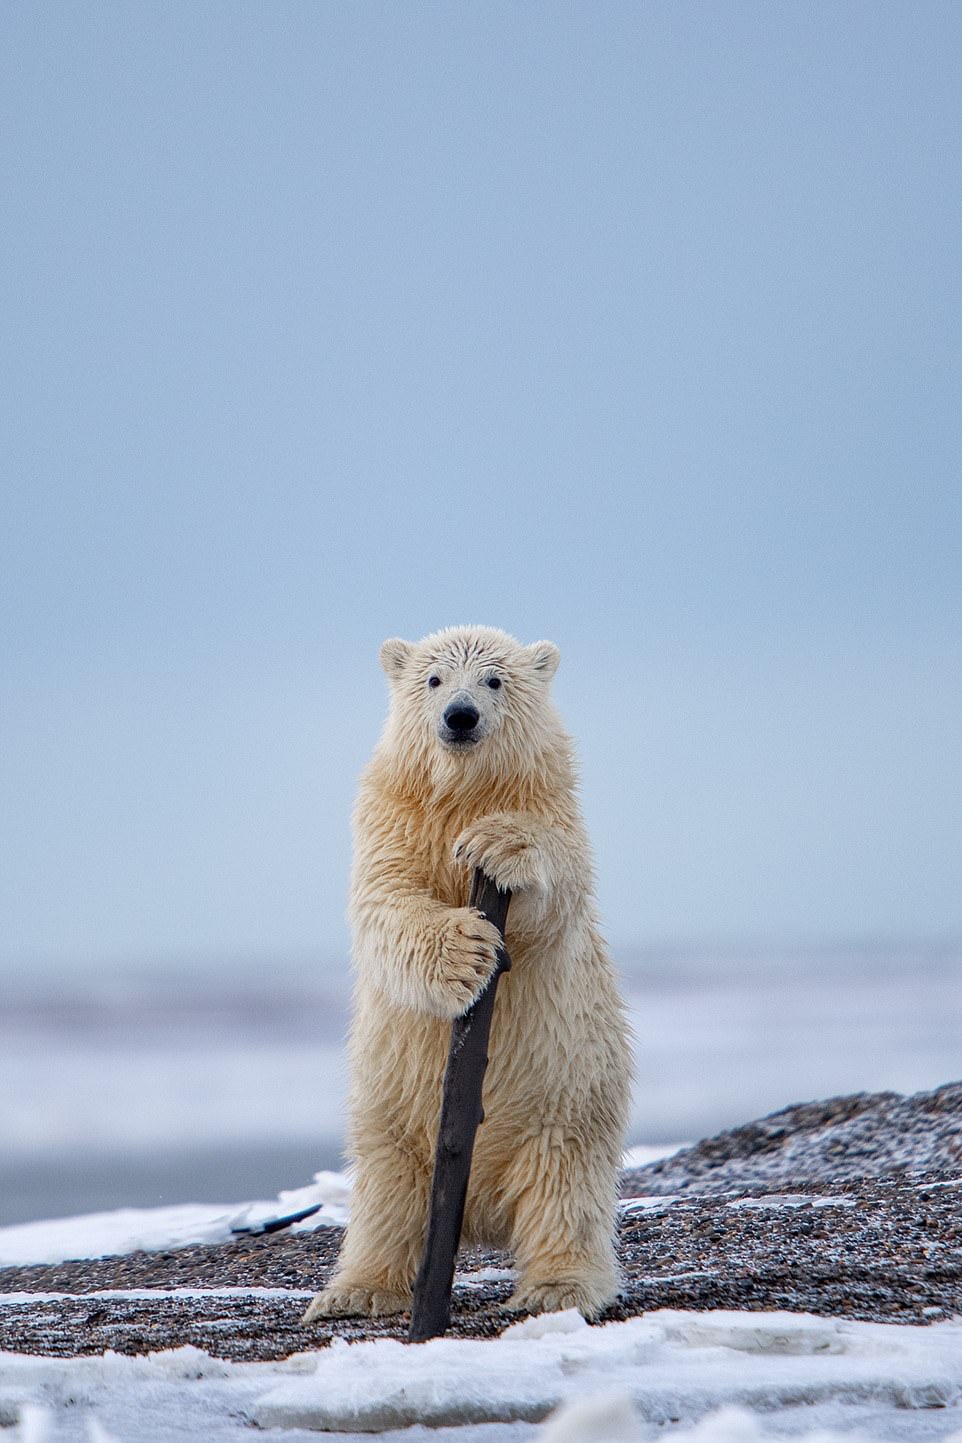 The Cabaret Bear by Khurram Khan from Piscataway, United States: 'This polar bear cub found this drift wood pretty amusing and was playing it when it suddenly stopped and stood up using it almost like a performer does at times'